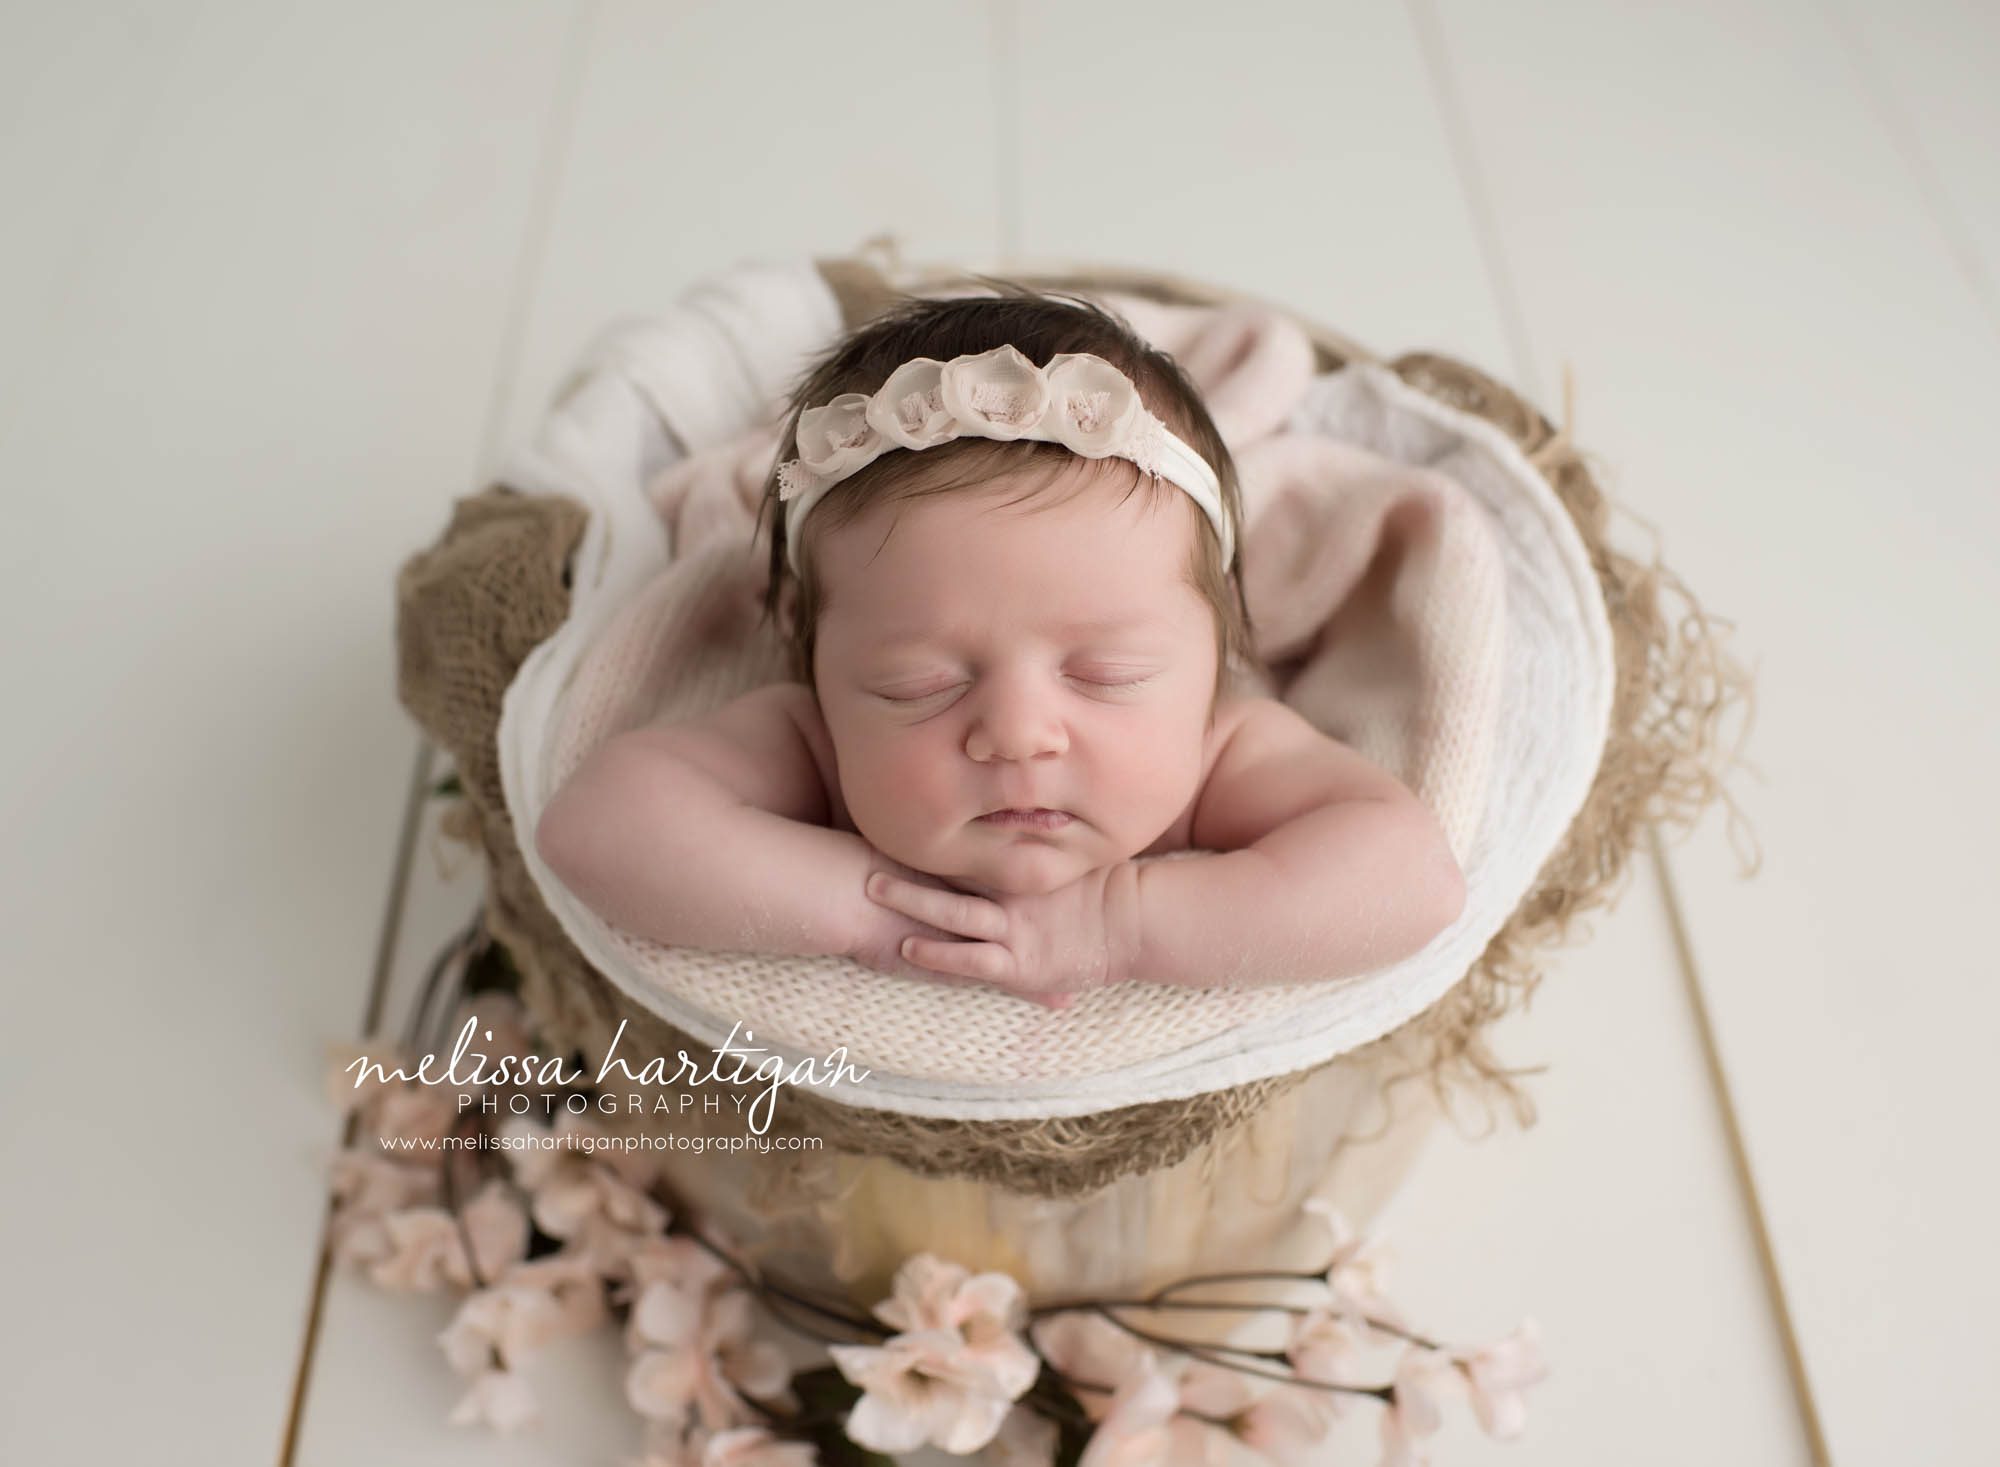 Melissa Hartigan Photography Connecticut Newborn Photographer Coventry Ct Middlefield CT baby Fairfield county Newborn and maternity CT photographer Baby girl white floral headband in wooden bowl with white knit blanket and pale pink flowers